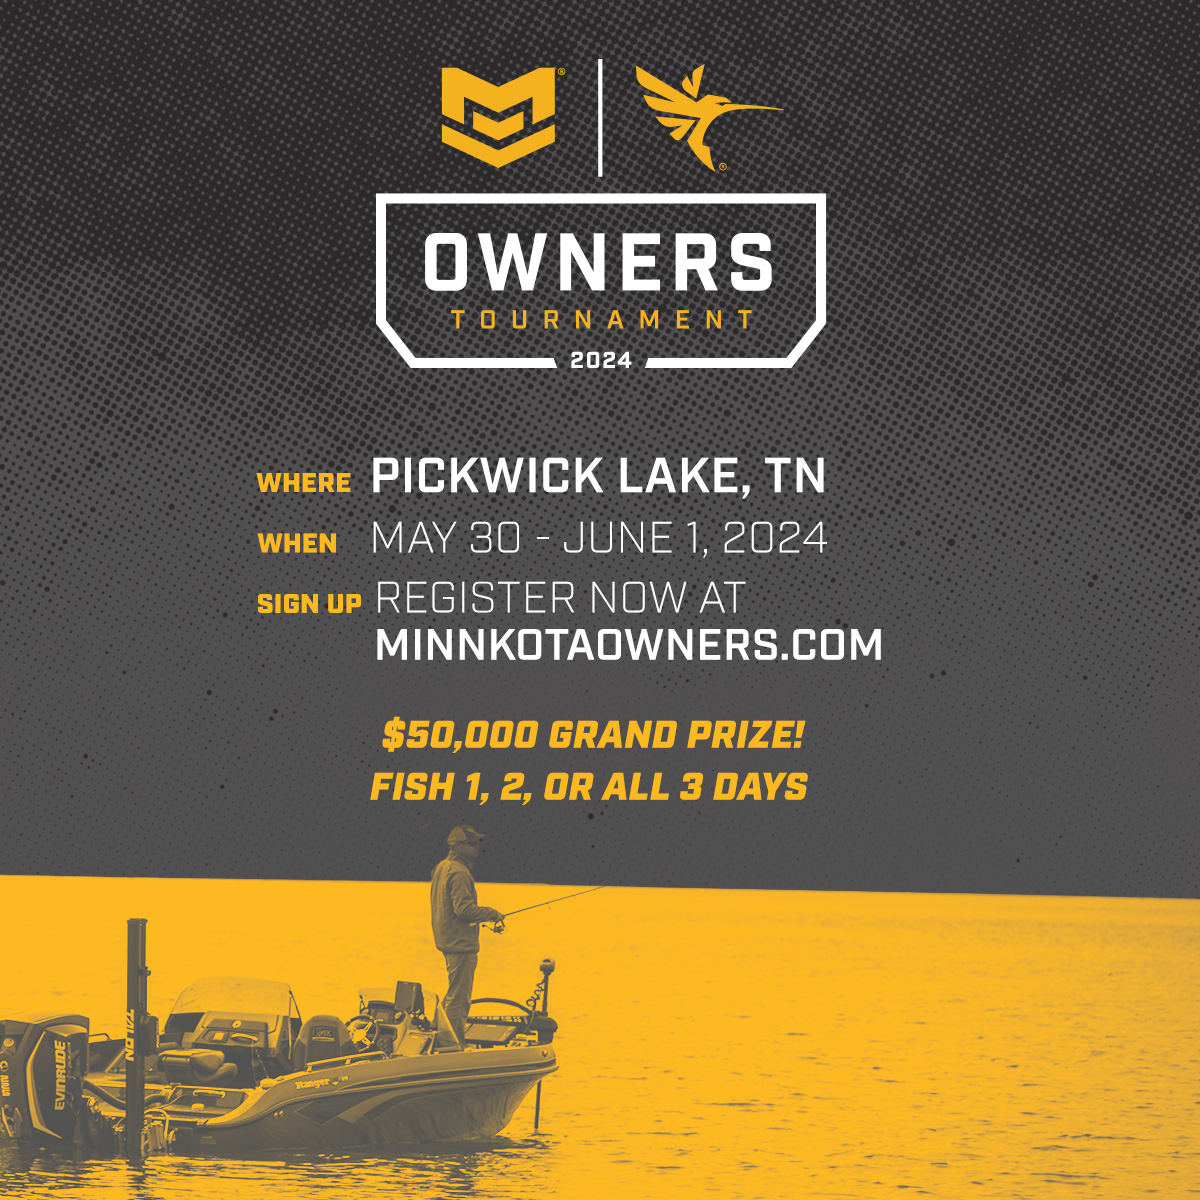 The 2024 Minn Kota & Humminbird Owners Tournament is just weeks away! Click on the link to sign up today to compete for exciting hourly payouts and a $50,000 grand prize! Sign up Today 👉 minnkotaowners.com